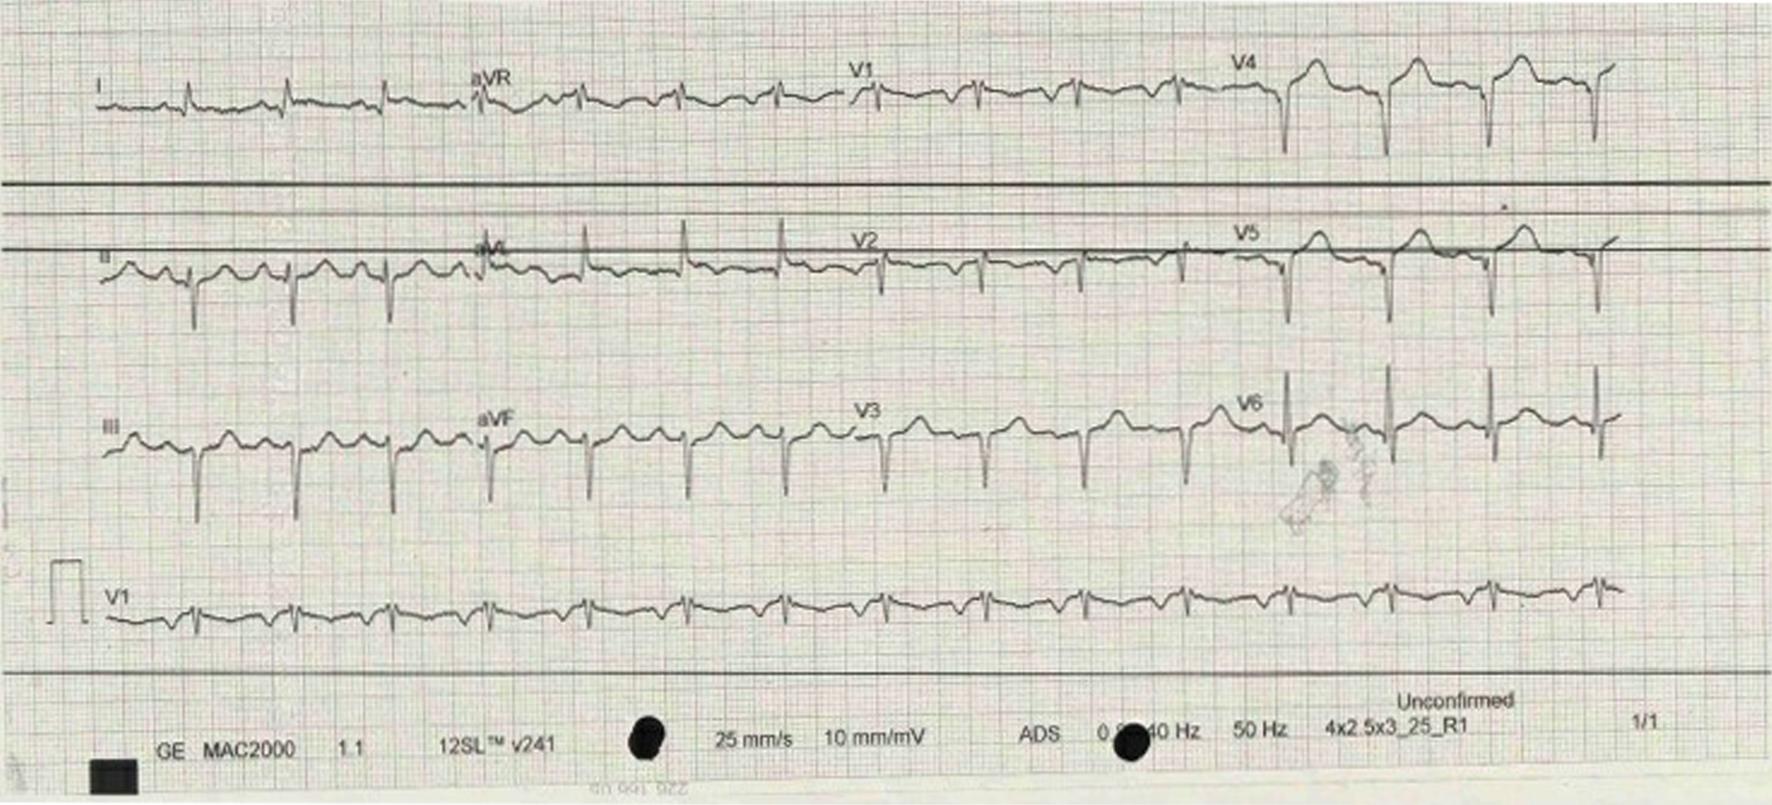 Electrocardiogram changes consistent with anterior STEMI, Q waves in V1 to V5, III and aVF, and ST elevation in V4 and V5.